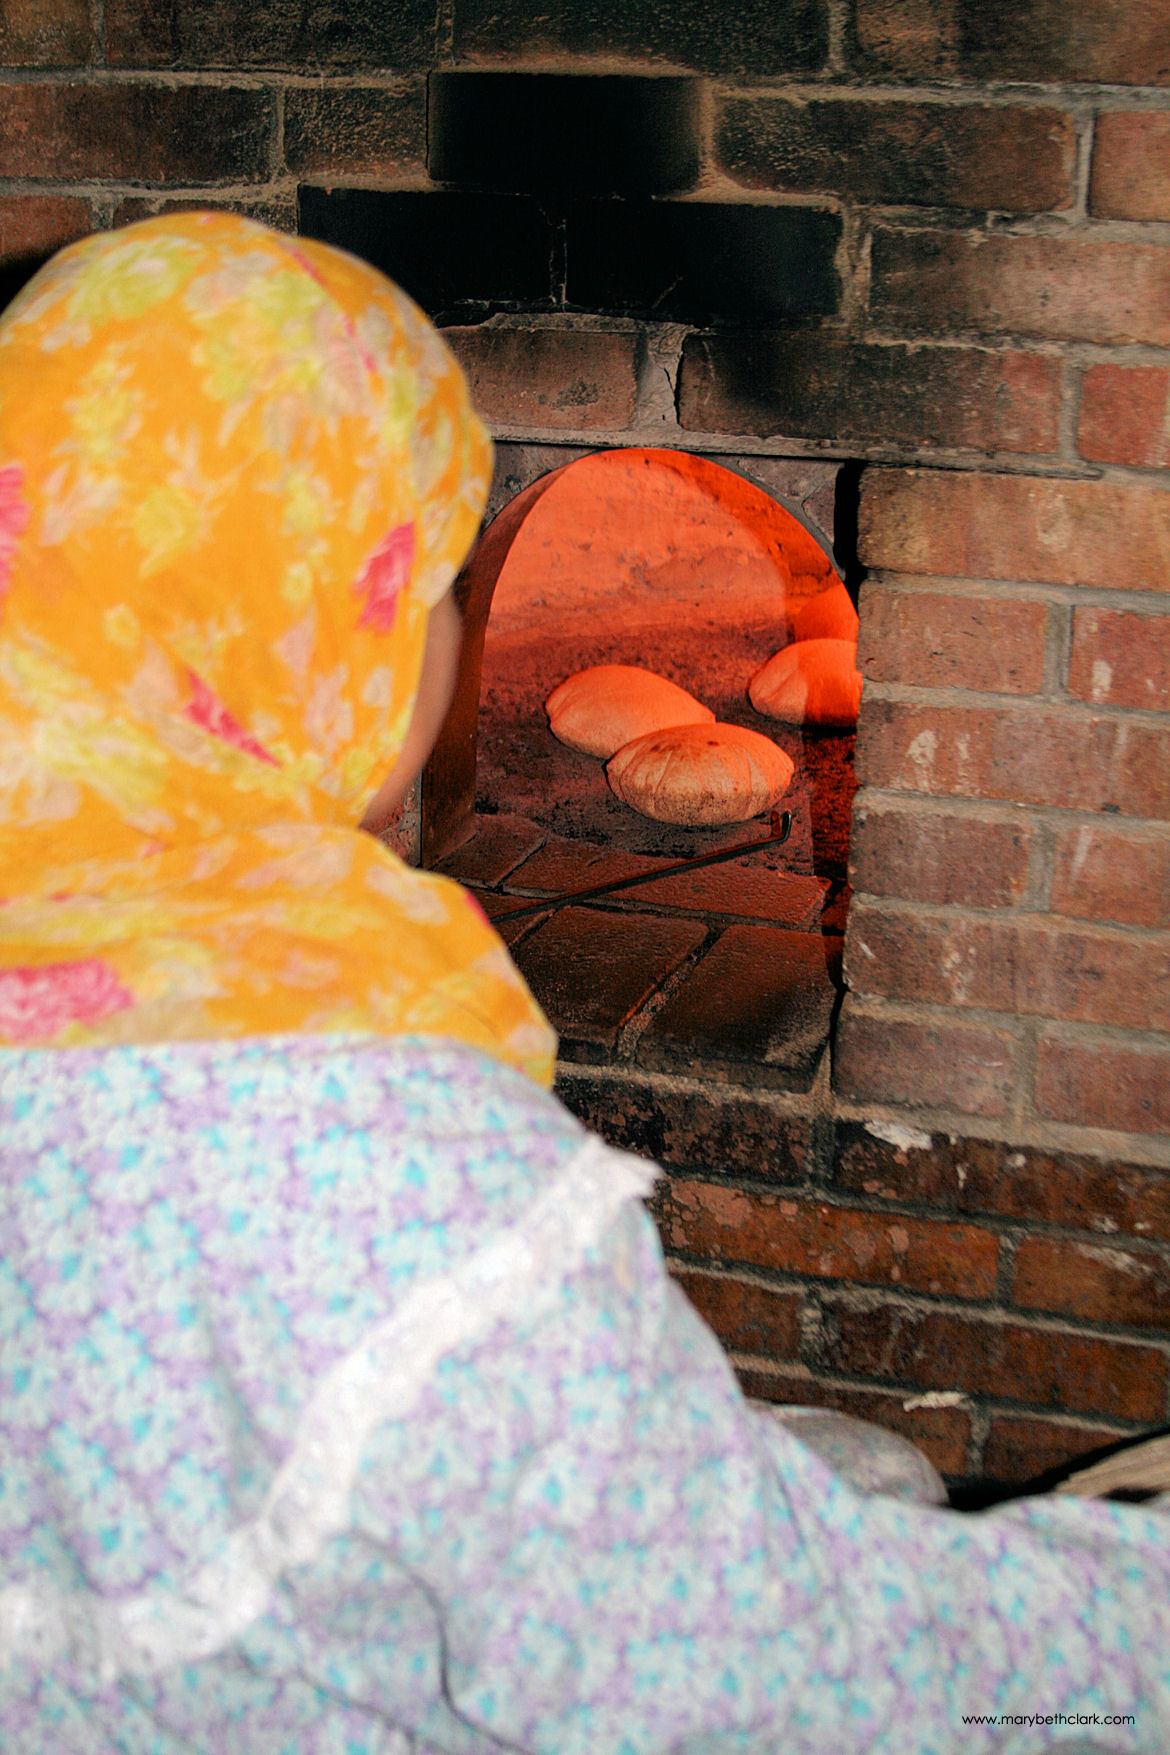 Travel - Africa - Egypt - Cairo - Aish Baladi Rising in the Outdoor Oven